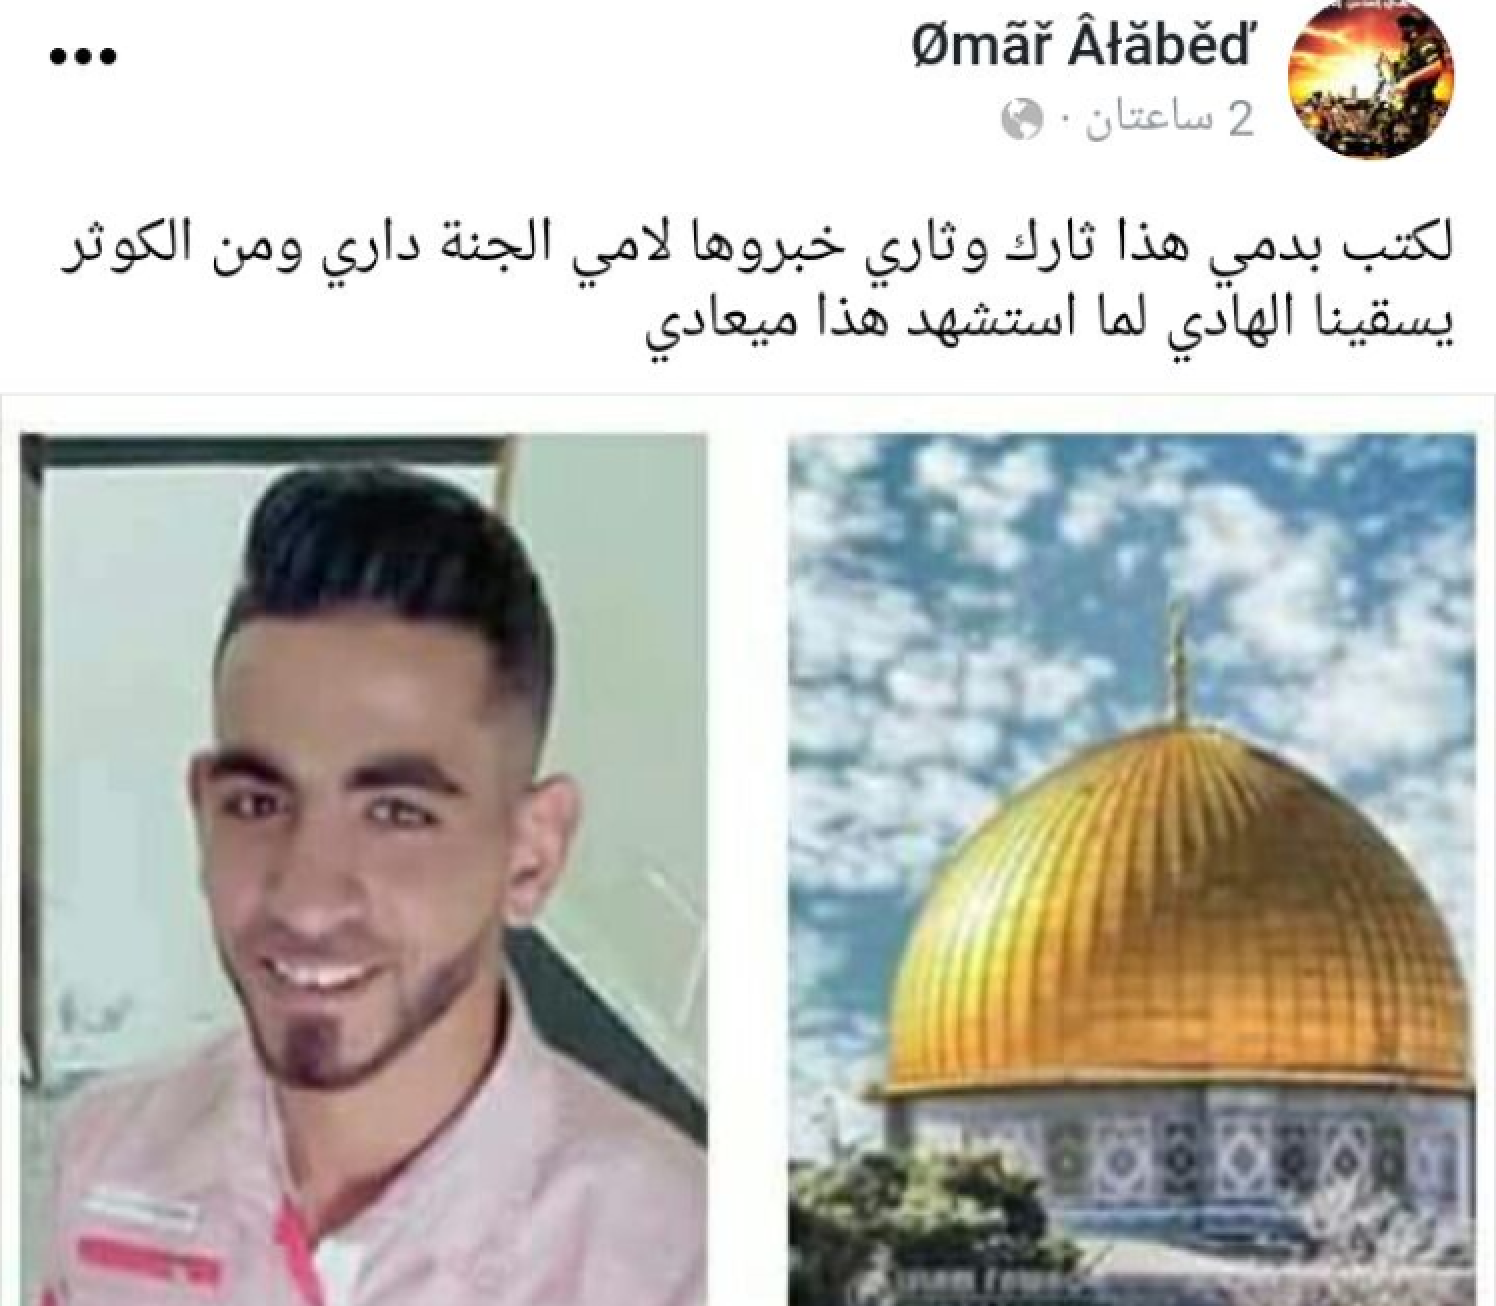 The Facebook status posted by 19-year-old Omar al-Abed the same evening he attacked and killed three members of an Israeli settler family